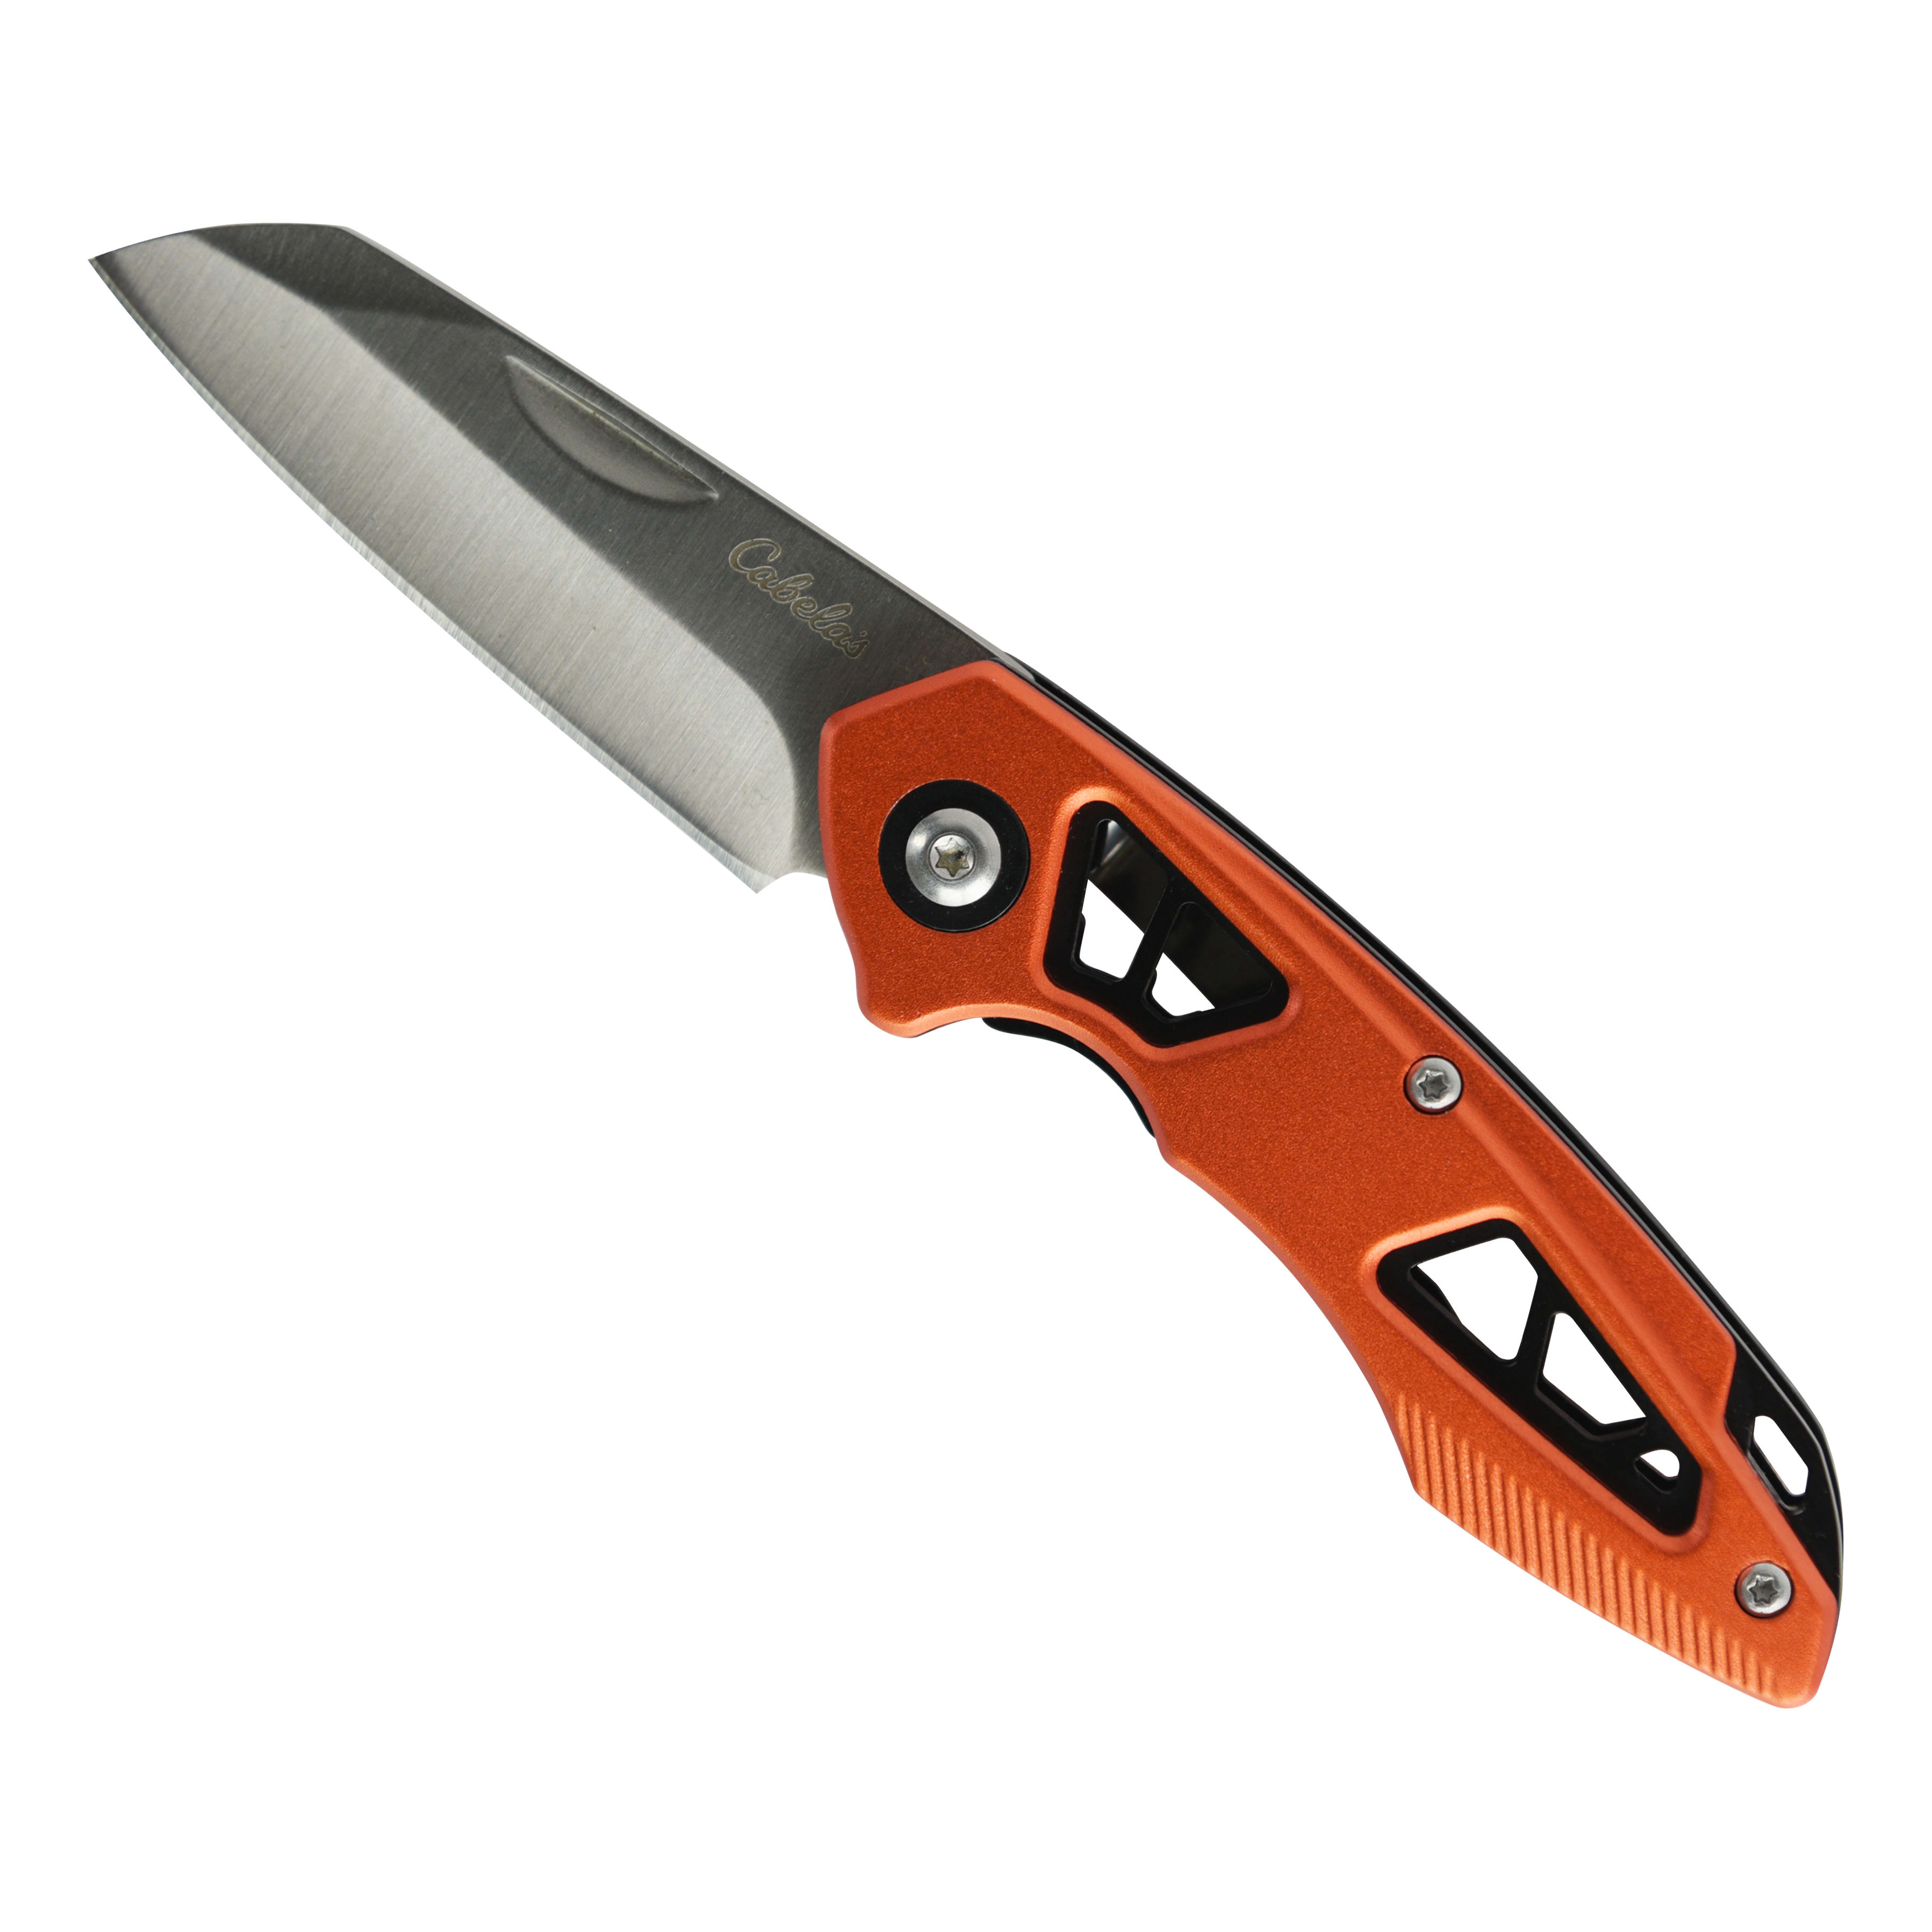 Cabela's Knife and Flashlight Combo with Waterproof Case - Orange - Knife View